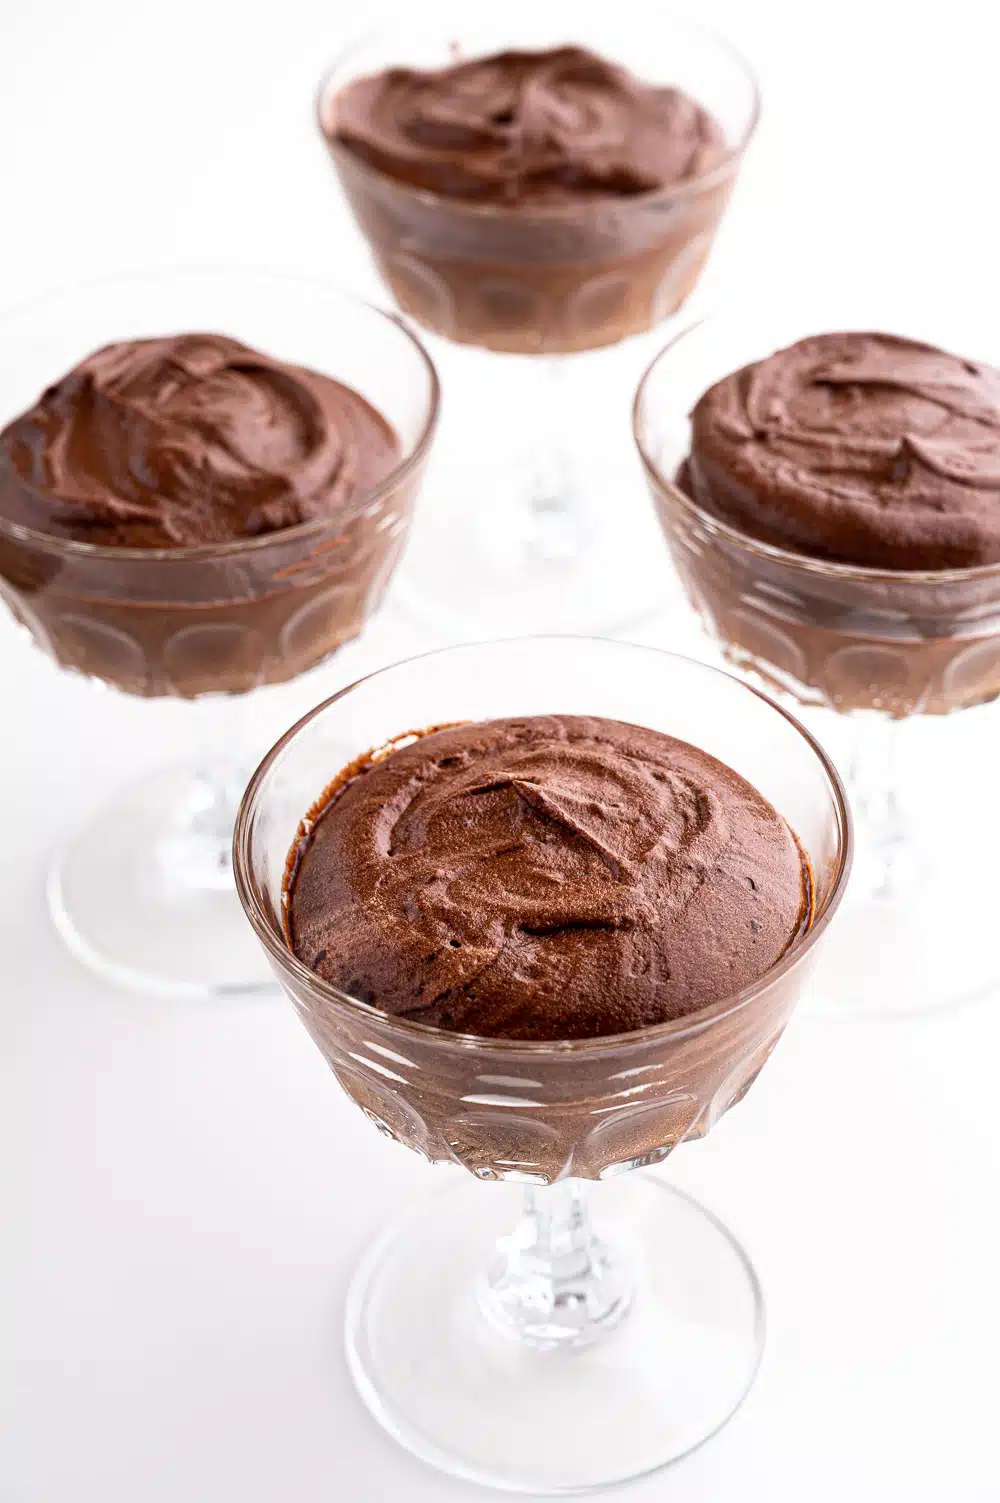 4 dishes of chocolate mousse against a bright white background. 